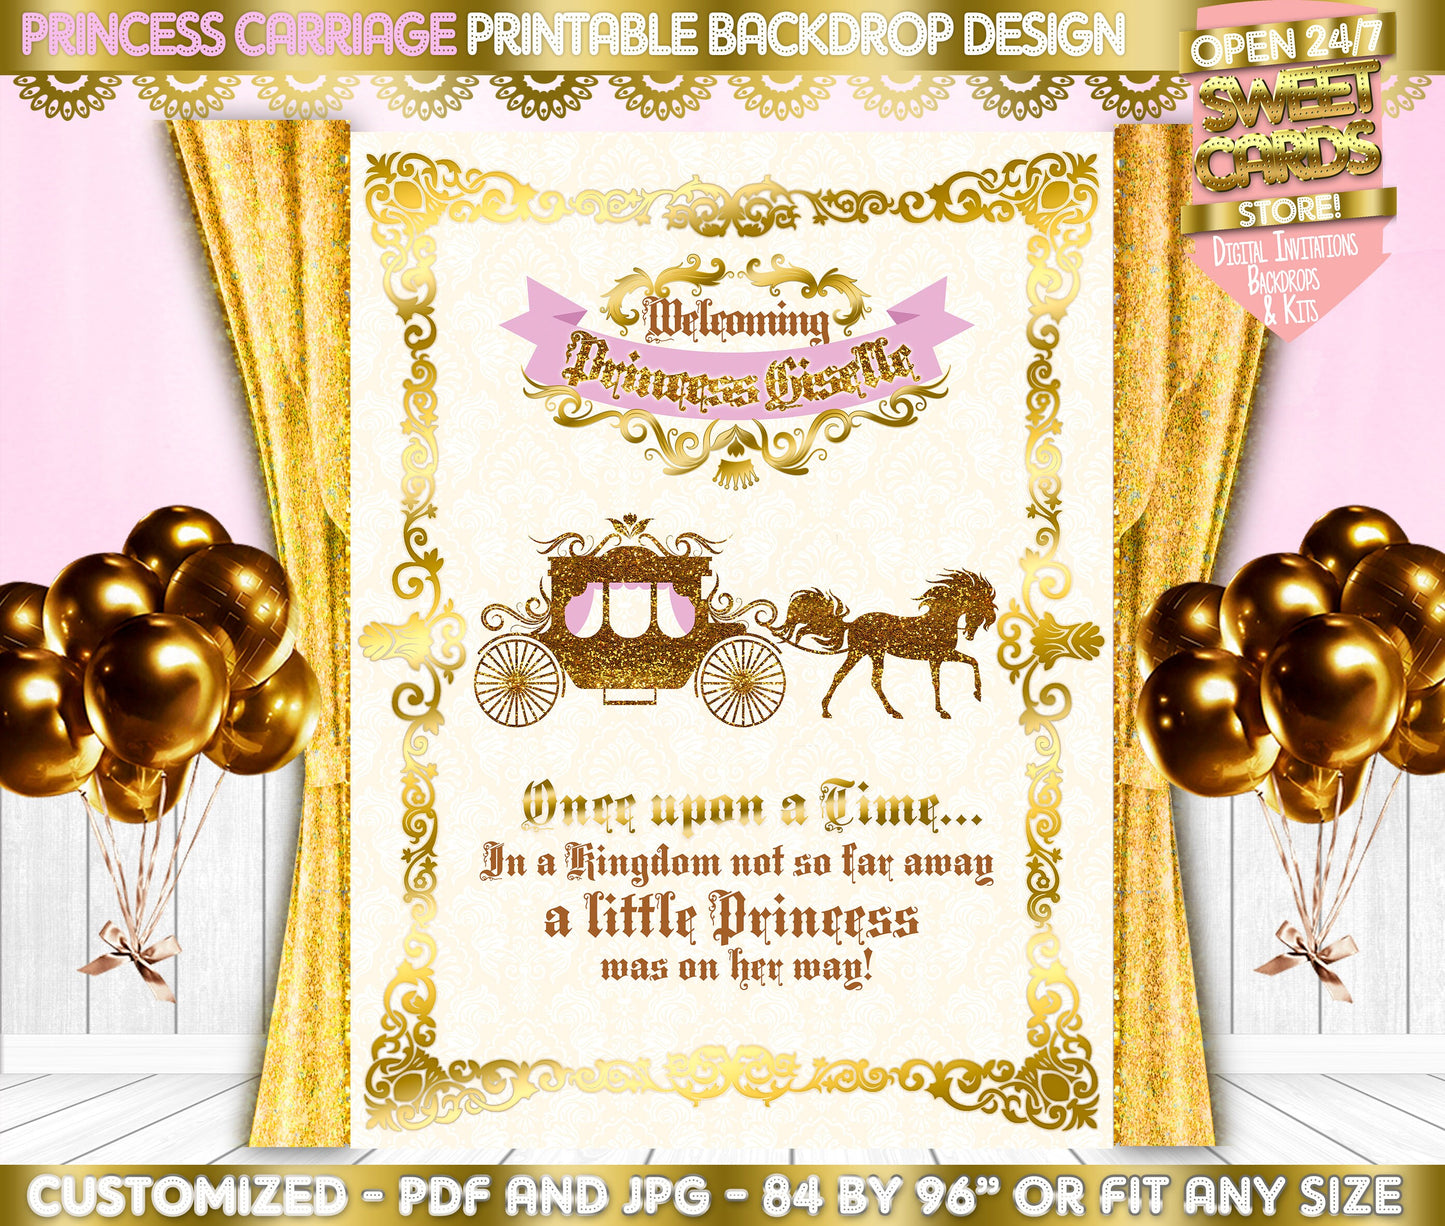 Princess Carriage Party Backdrop, Carriage Backdrop, Princess Fairytale party backdrop, Princess Baby shower Backdrop, Carriage Backdrop